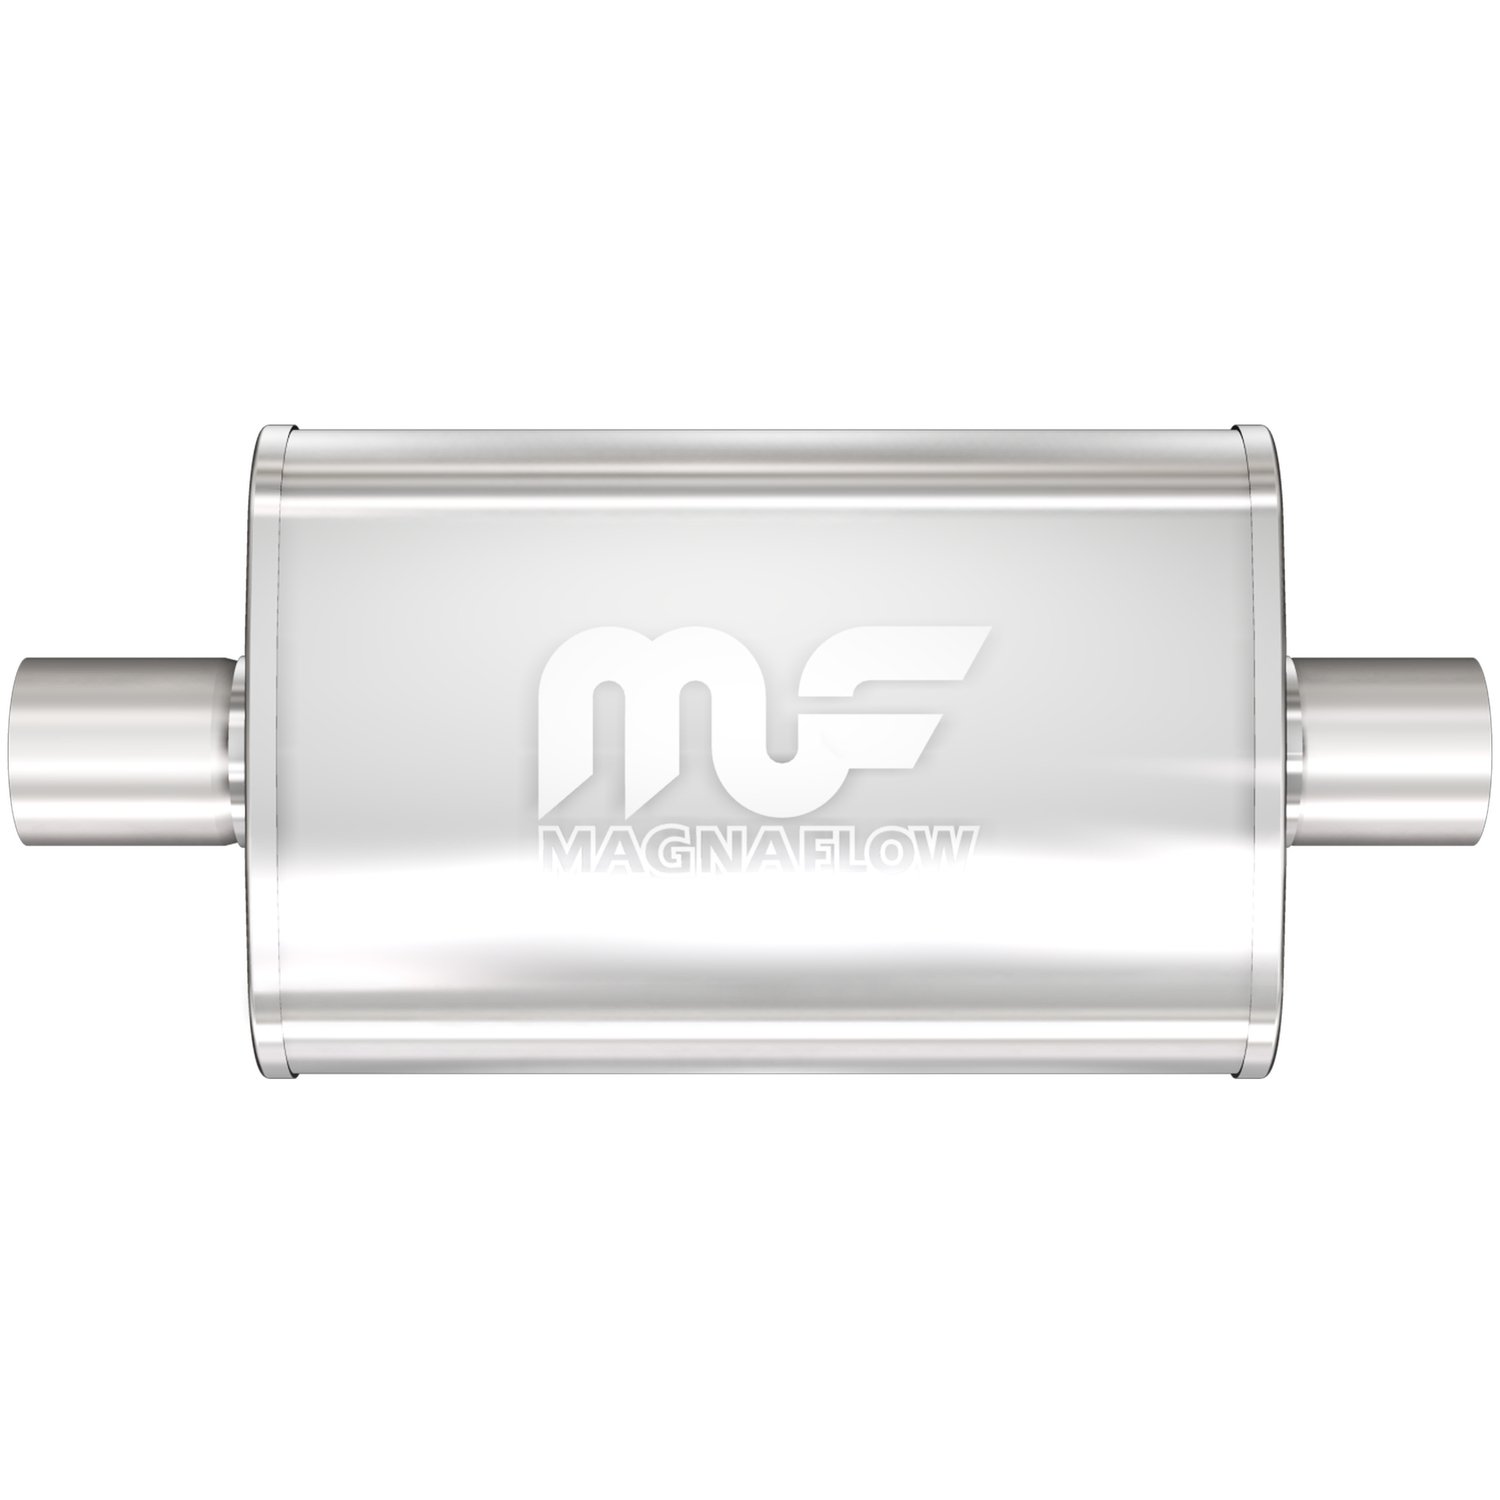 4" x 9" Oval Muffler Center In/Center Out: 2"/2" Body Length: 18" Overall Length: 24" Core Size: 2.5" Satin Finish